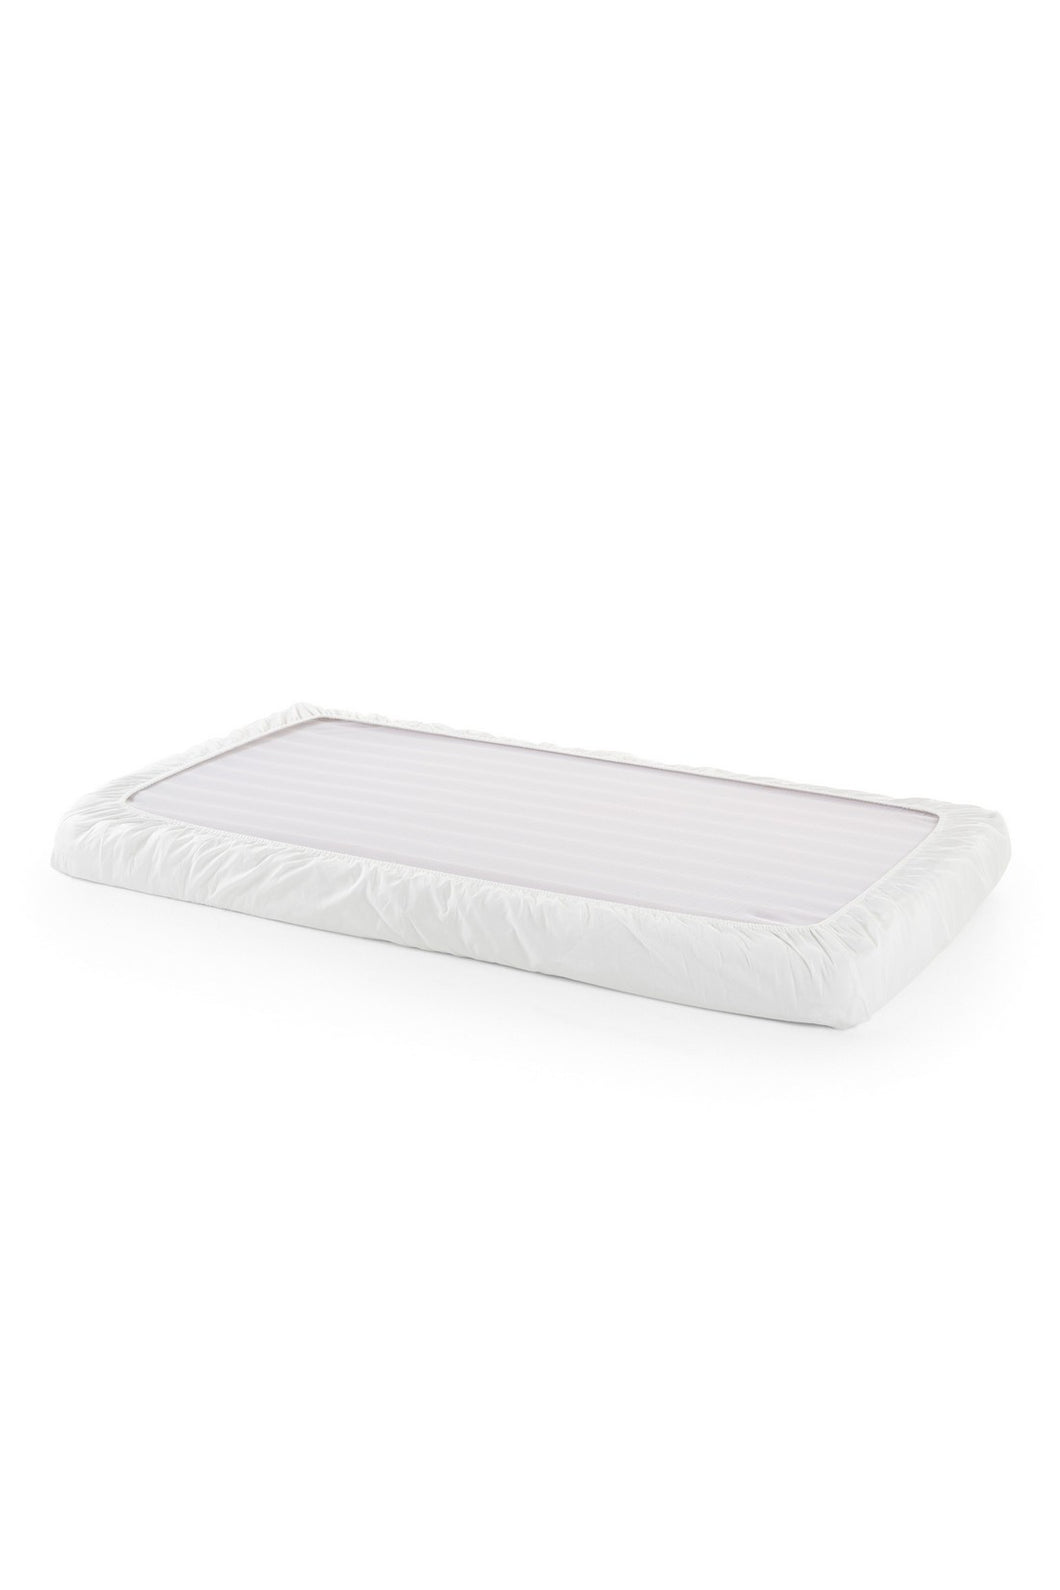 Stokke Home Cradle Fit Sheet White